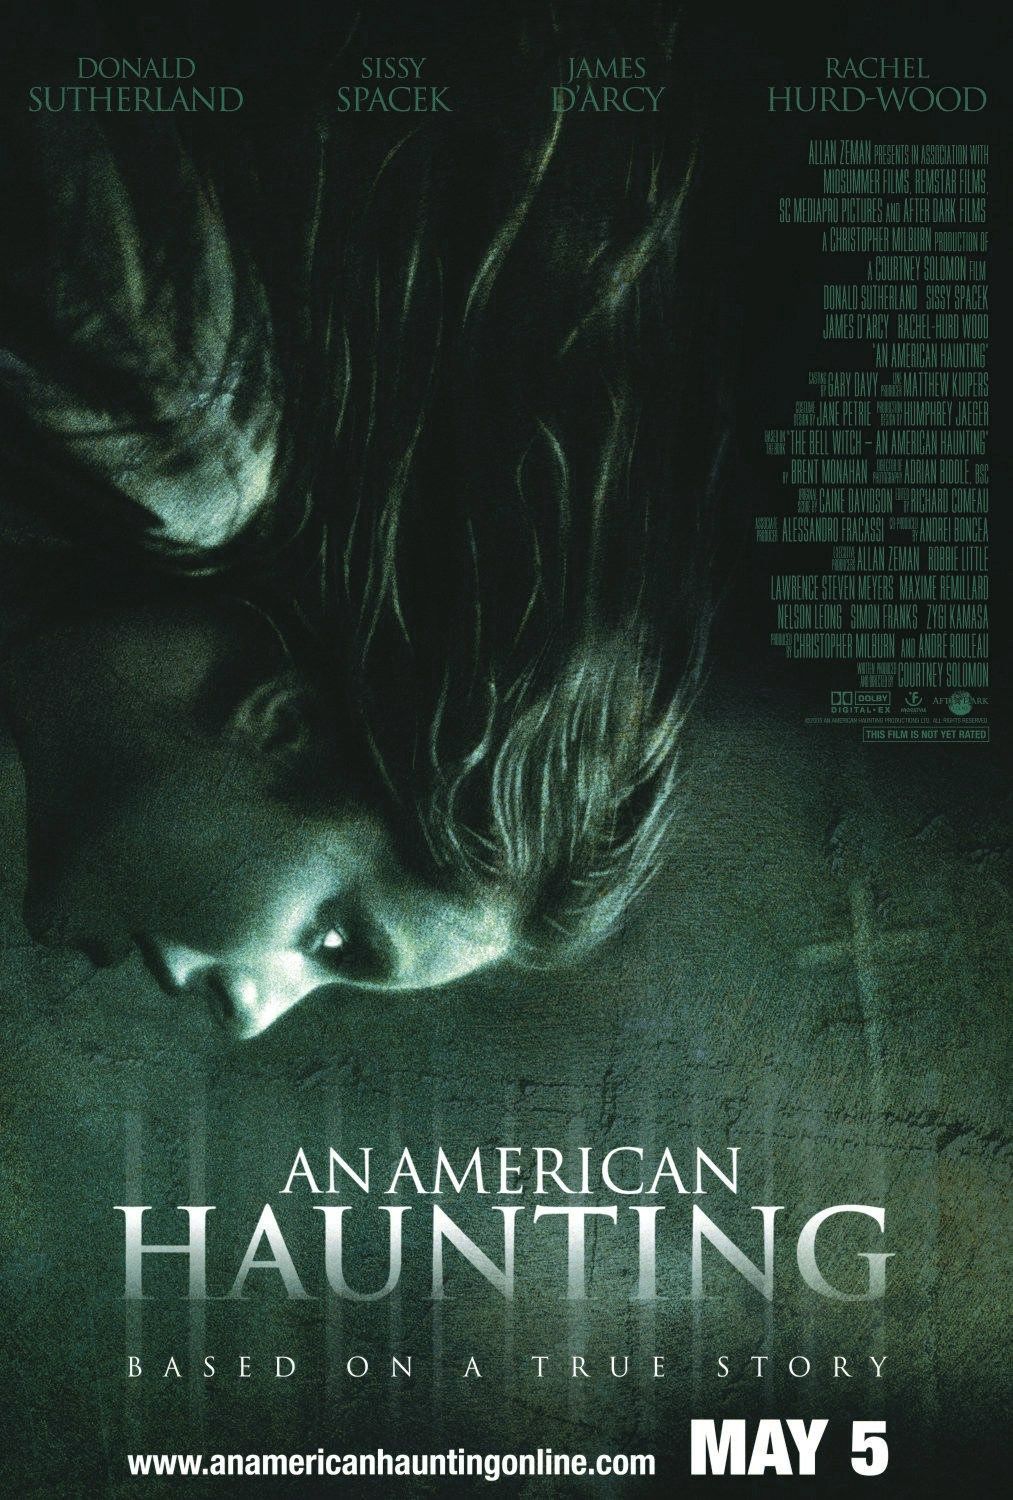 Extra Large Movie Poster Image for An American Haunting (#1 of 3)